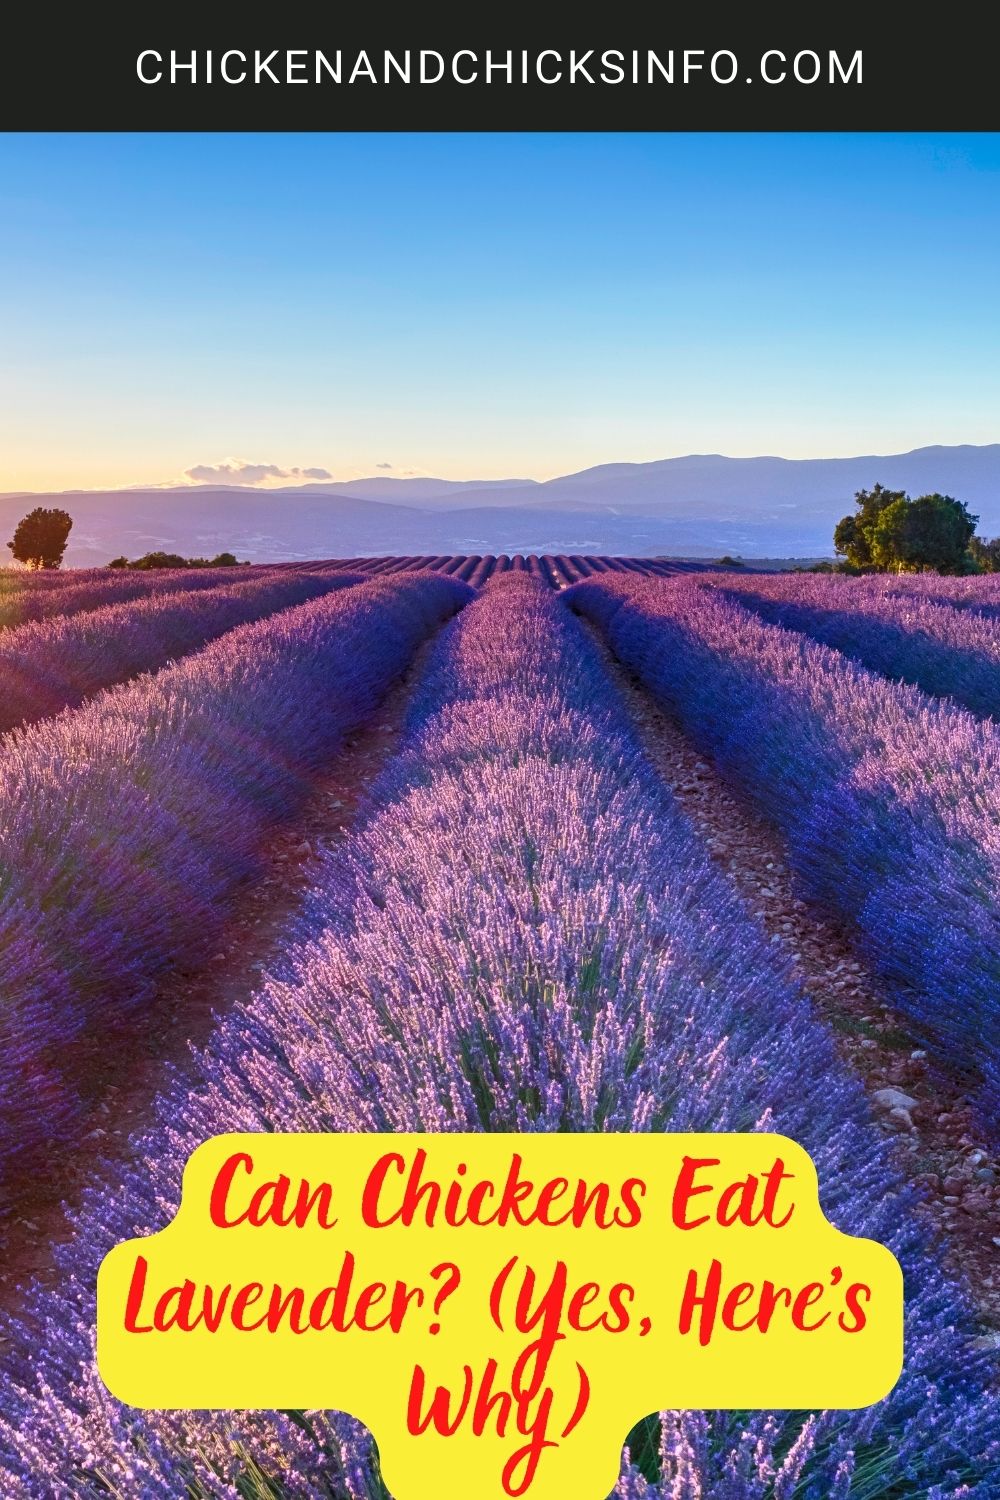 Can Chickens Eat Lavender? (Yes, Here's Why) poster.
